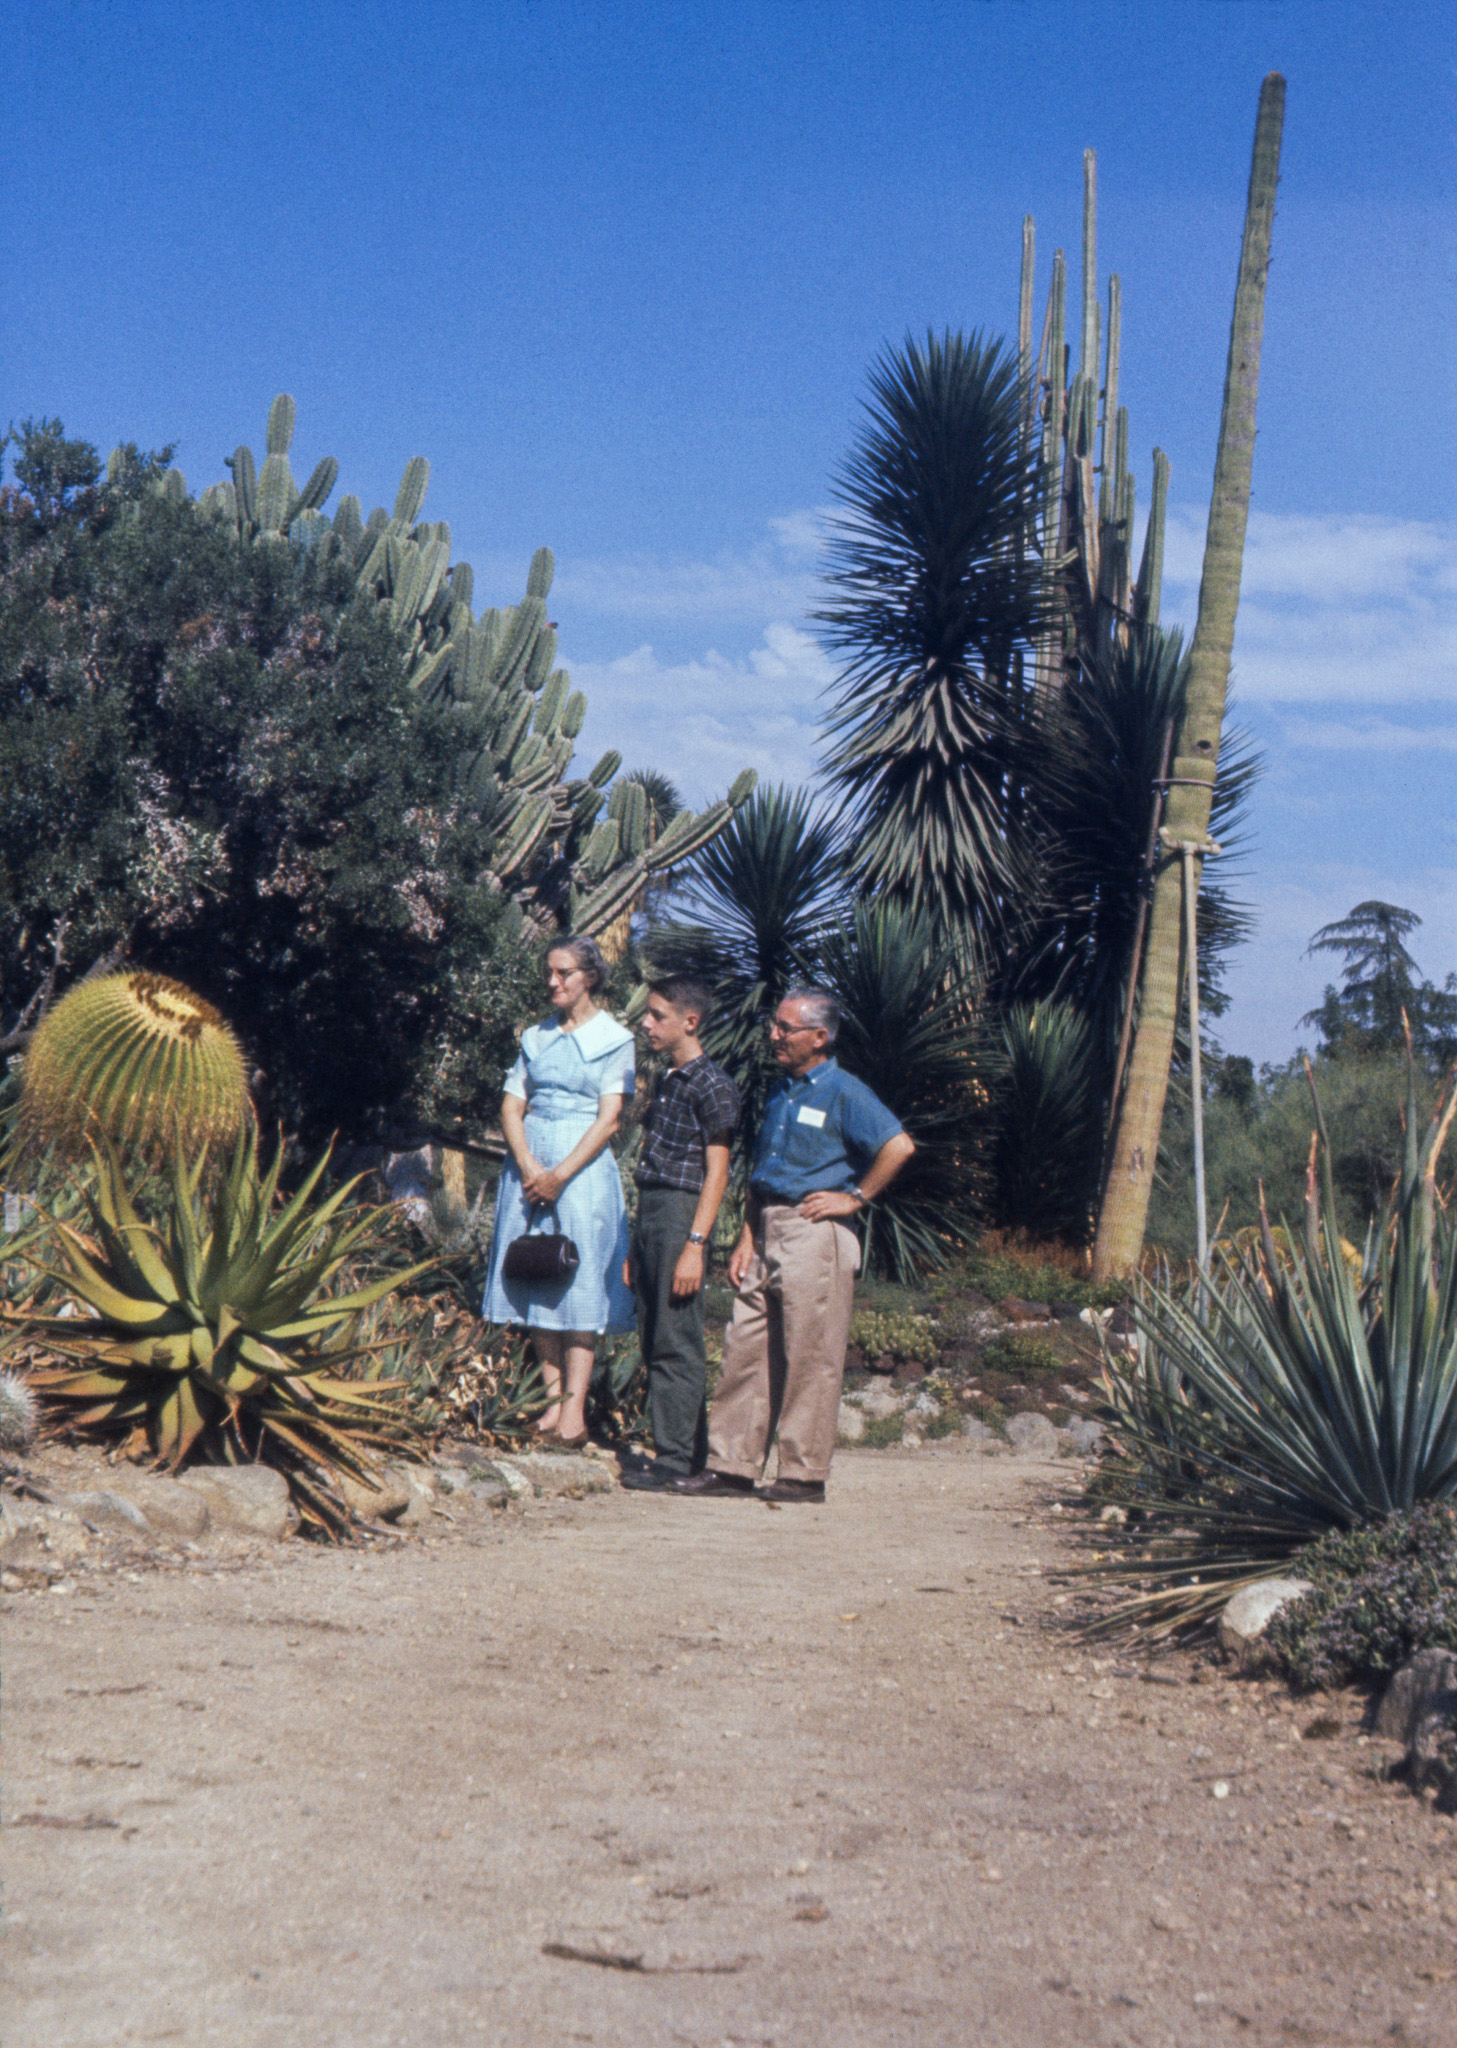 I don't remember me and my folks accidentally stumbling through a reducing ray in July 1960, so this must be our visit to Huntington Gardens in San Marino, California.

My brother's 35mm Ektachrome slide. View full size.